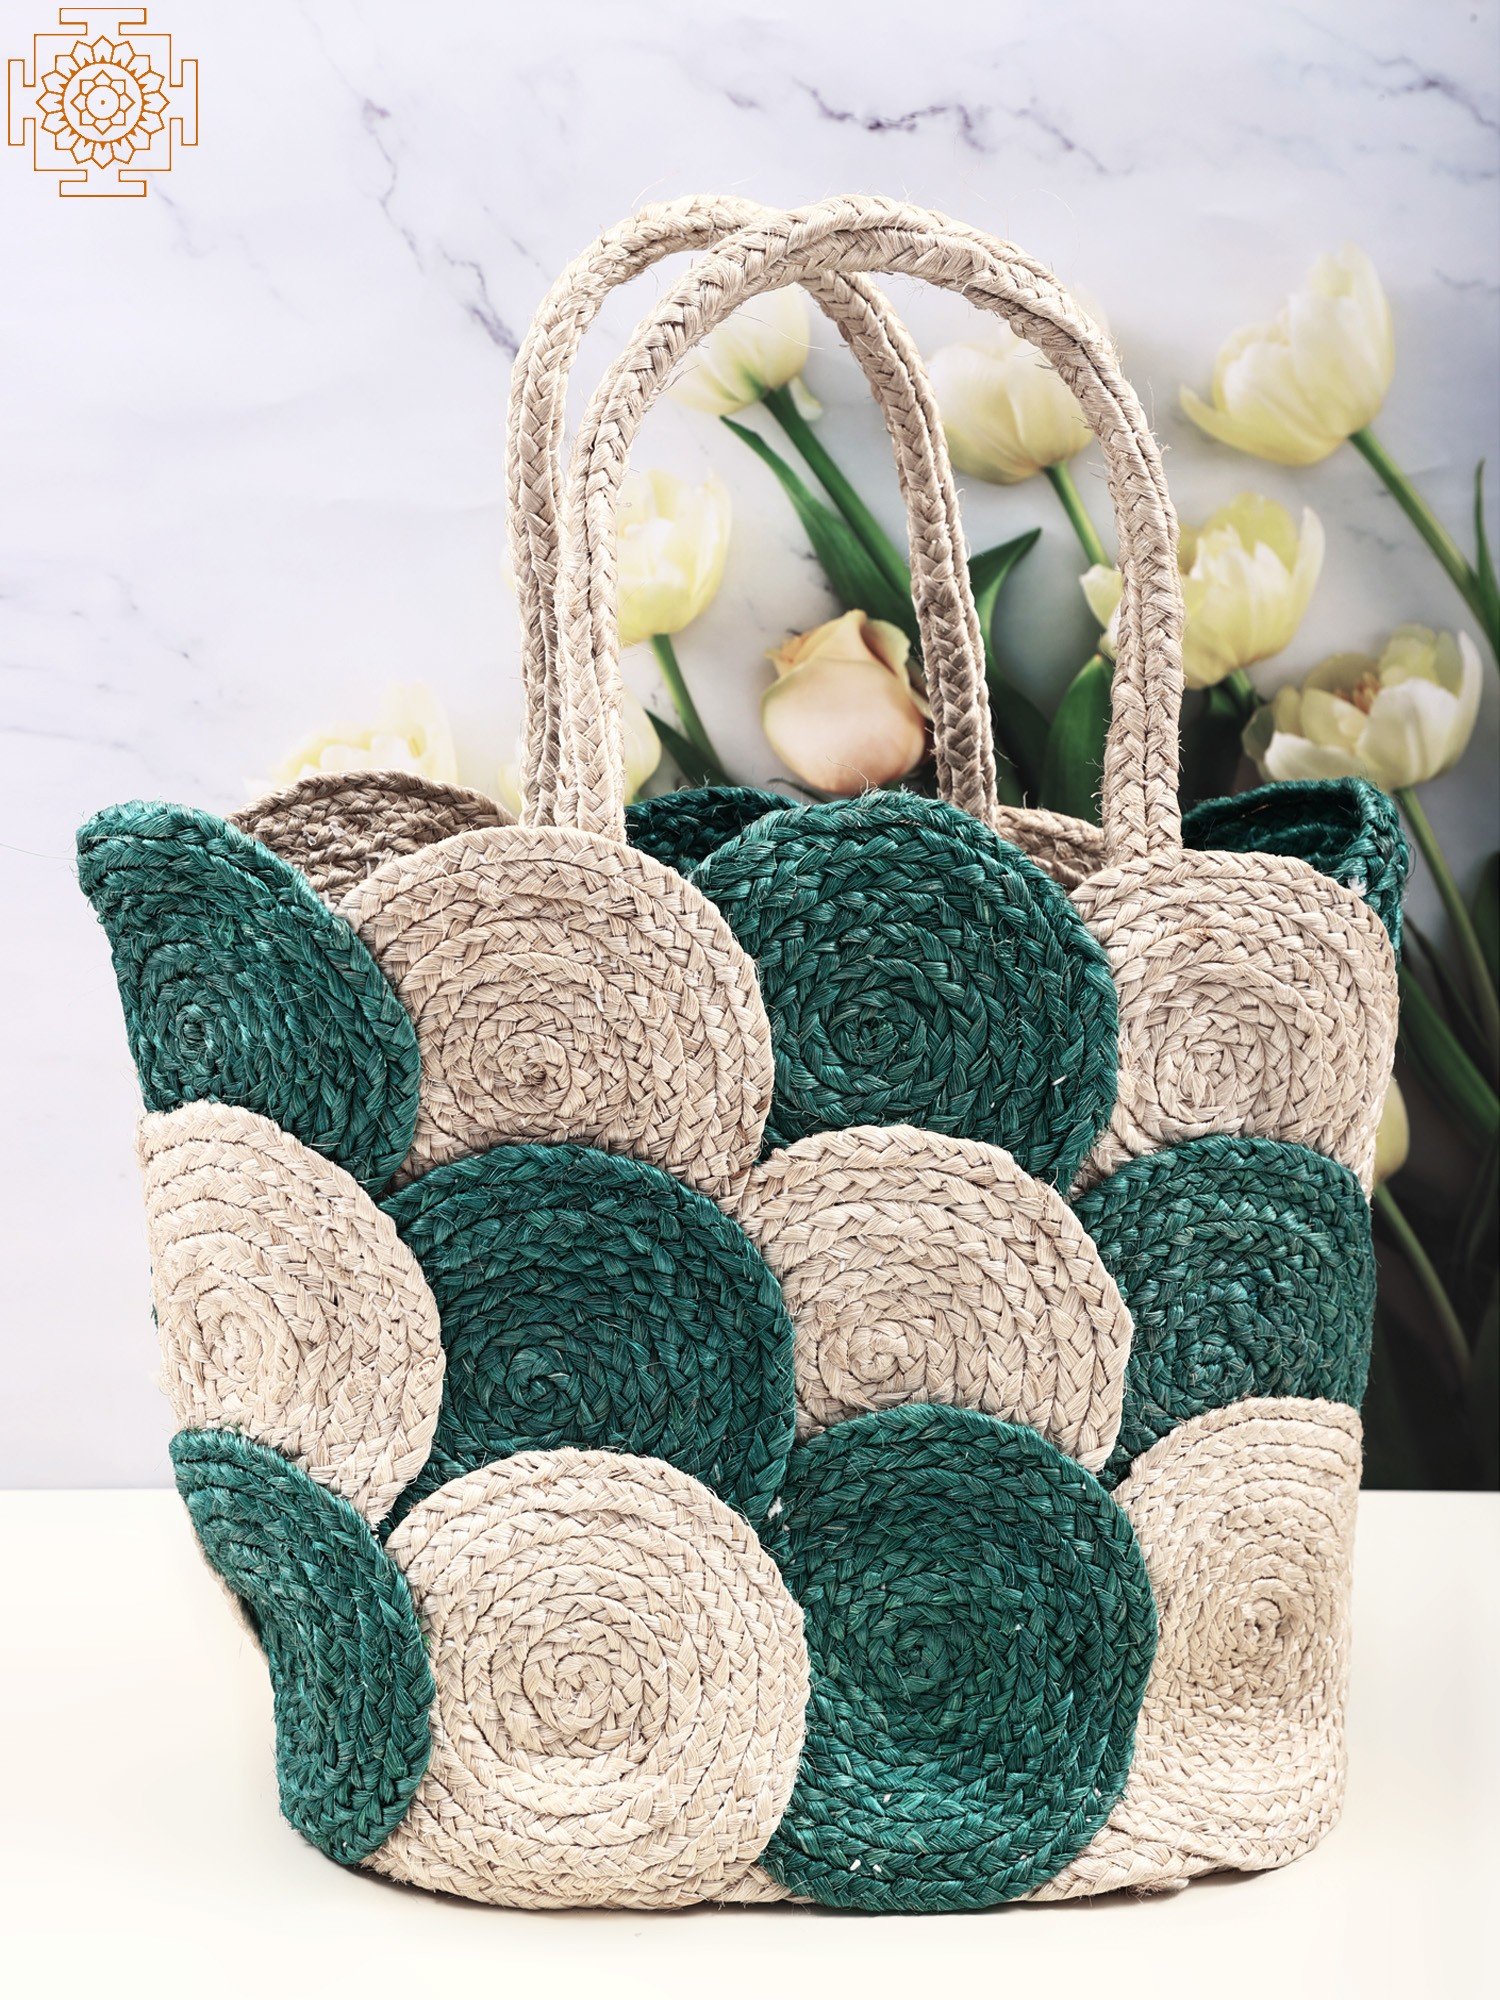 Eco Friendly Jute Conference Bags Manufacturer Supplier from Ghaziabad India